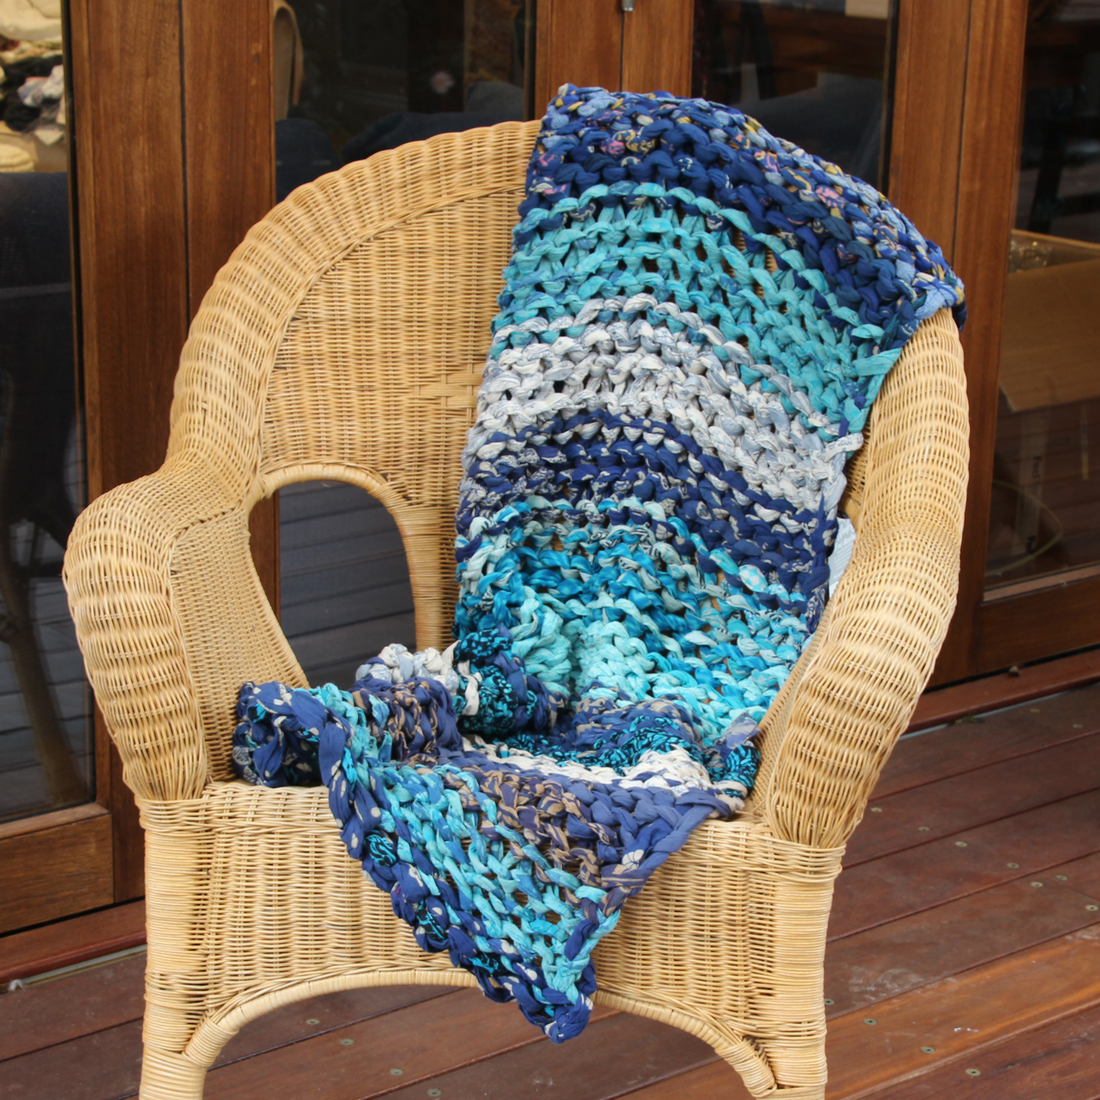 Blankets fair trade ethical sustainable fashion Knotted Throw - Ocean and Sky Blues conscious purchase Basha